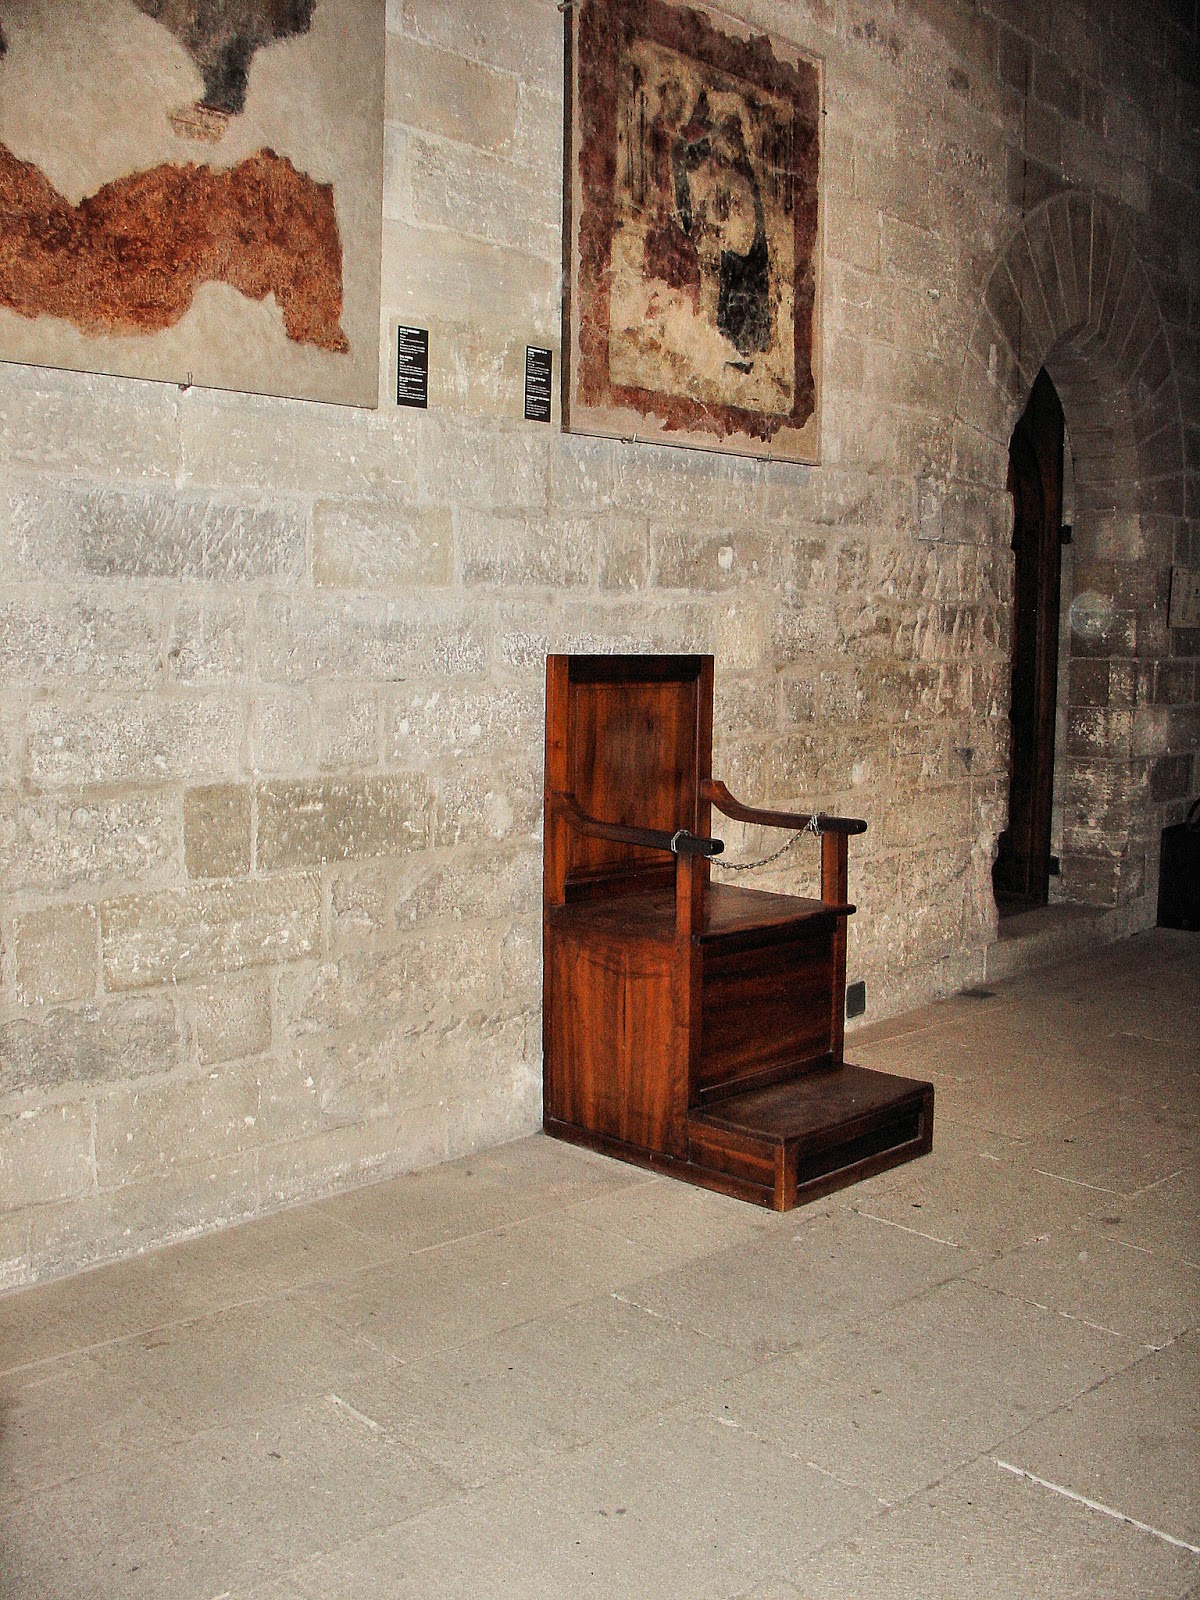 The Papal Seat inside the Consistory Hall.